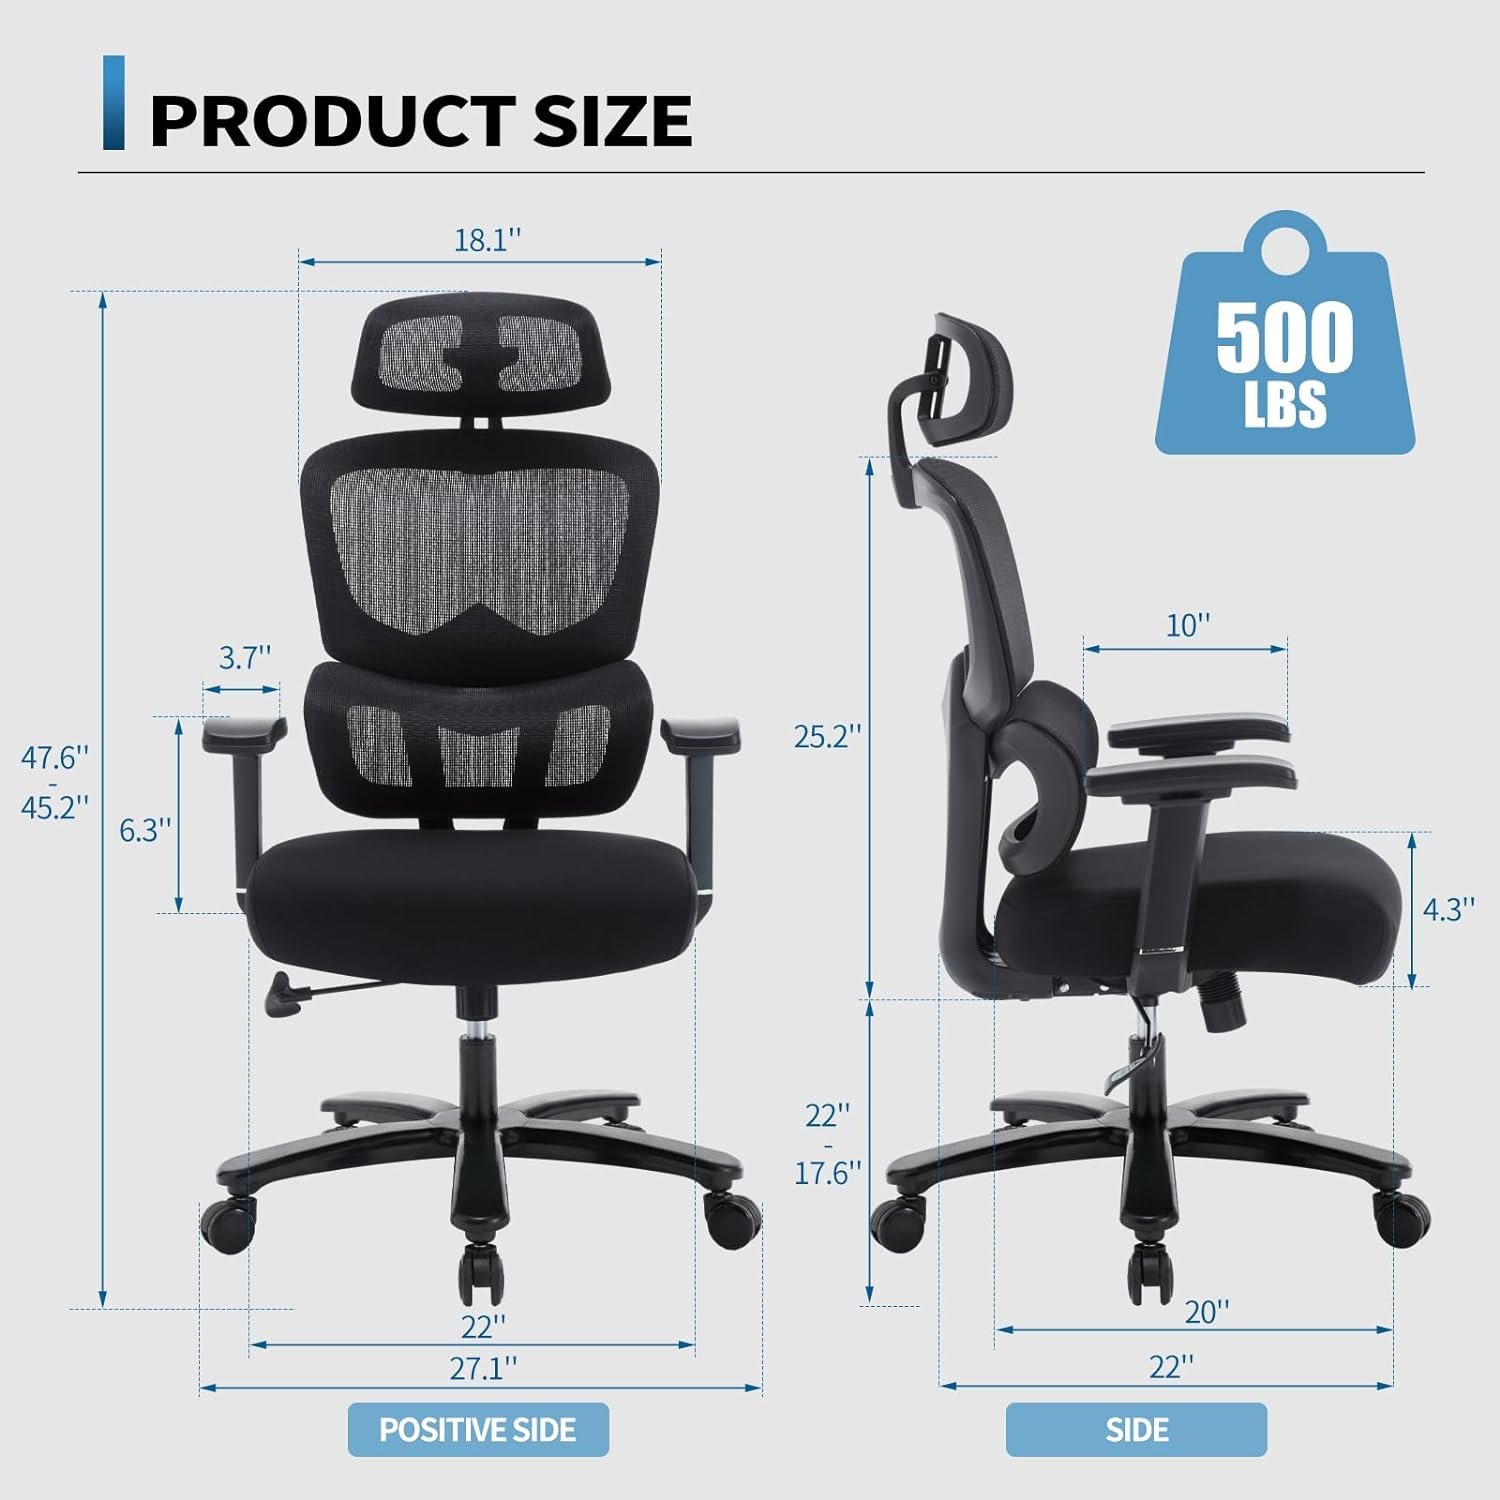 Fantasylab Big and Tall Office Chair 500LBS Ergonomic Office Chair for Heavy People with Heavy Duty Metal Base, Dynamic Lumbar Support, Adjustable Armrest and Headrest Mesh Chair